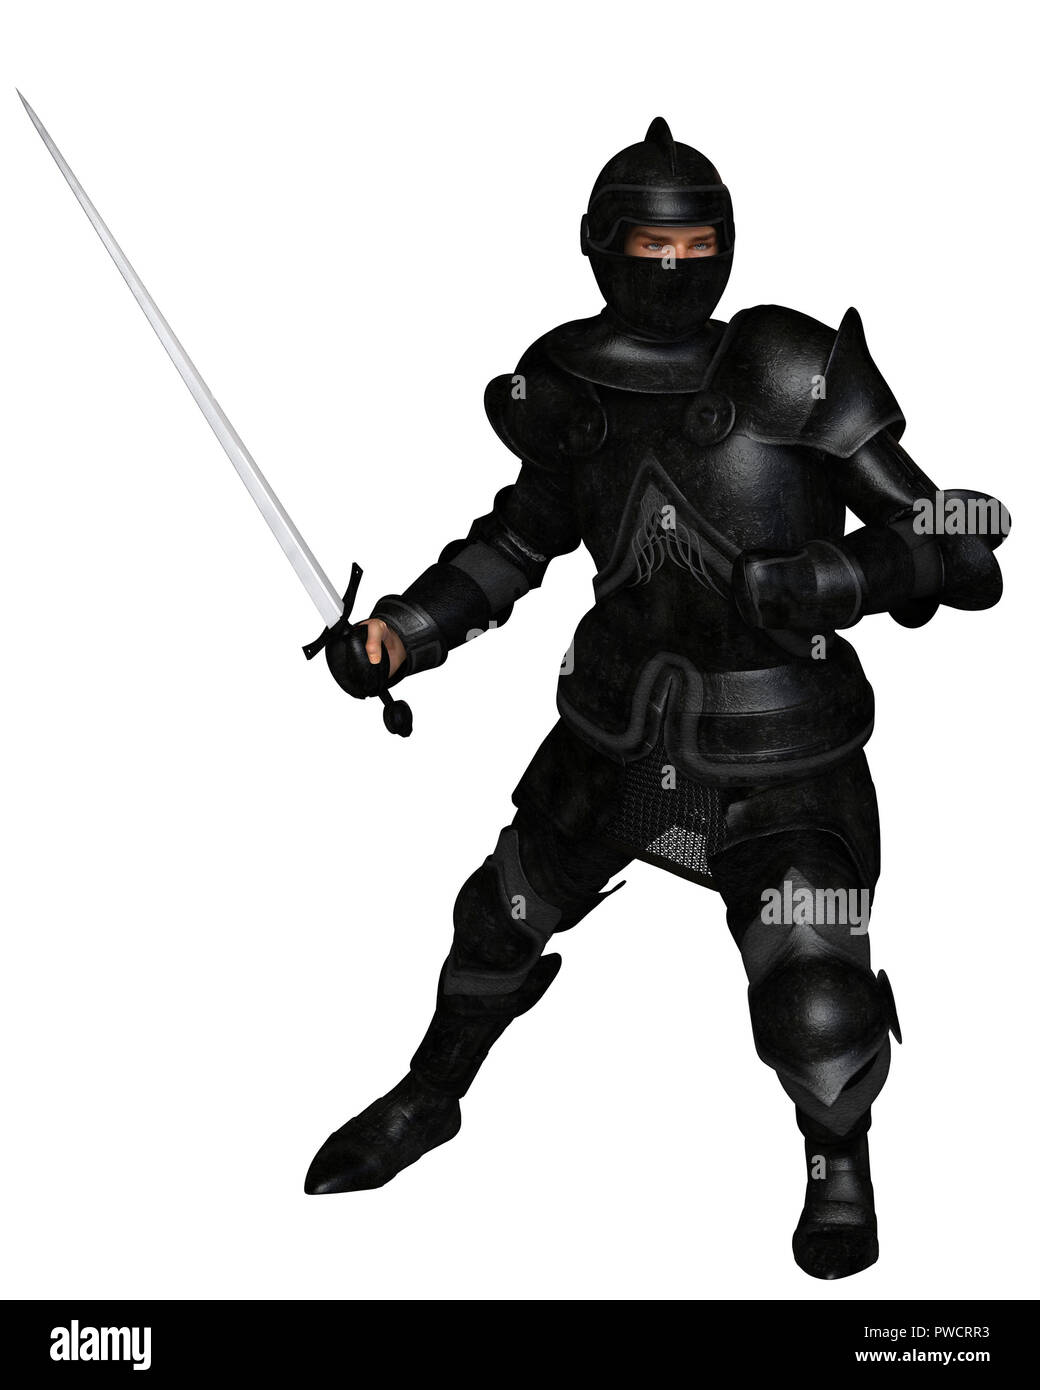 Black Knight in Medieval Armour, Attacking Stock Photo